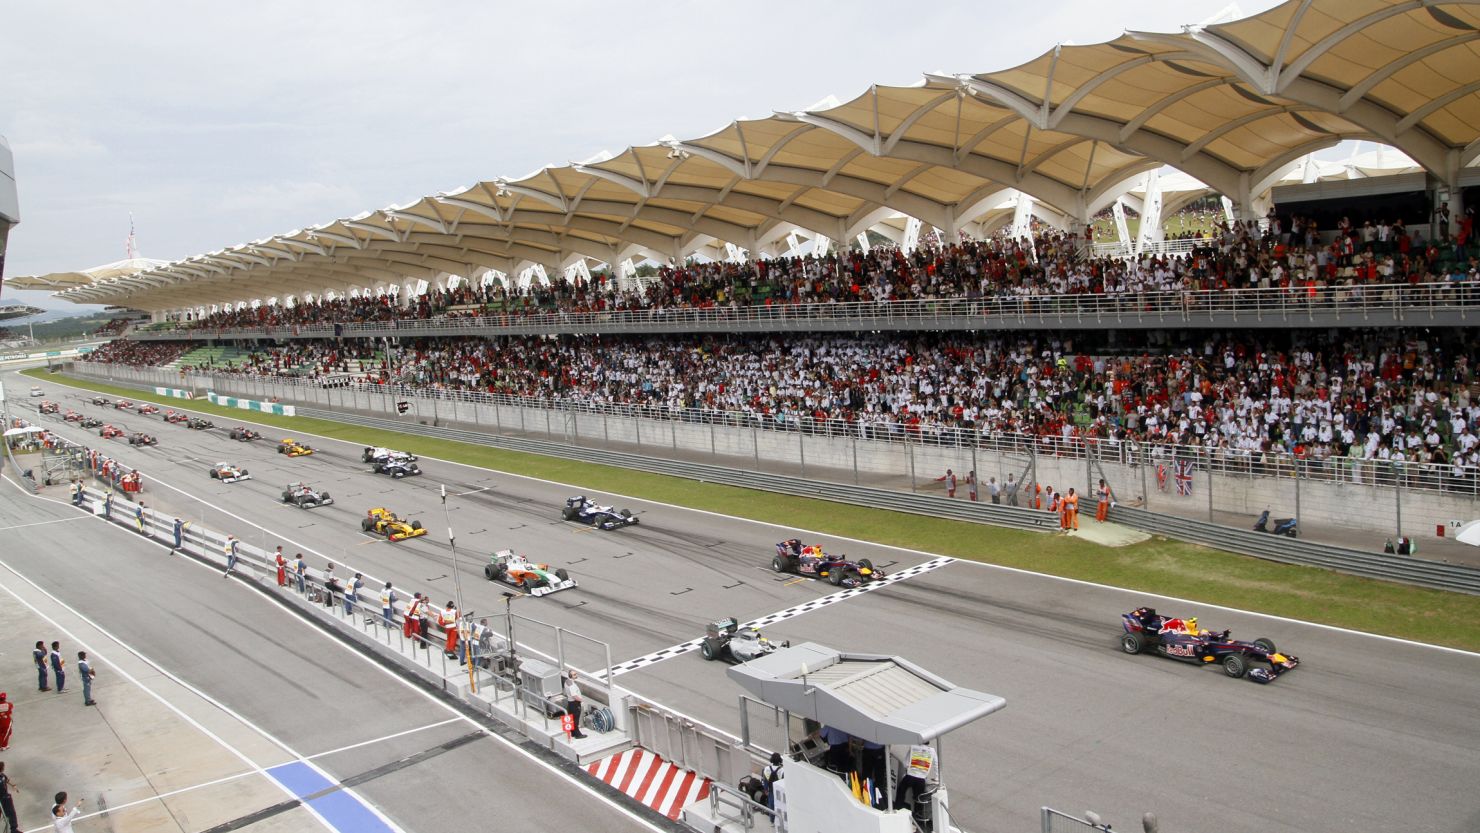 The Bahrain Grand Prix was due to be the opening race of the 2011 season, before being canceled.